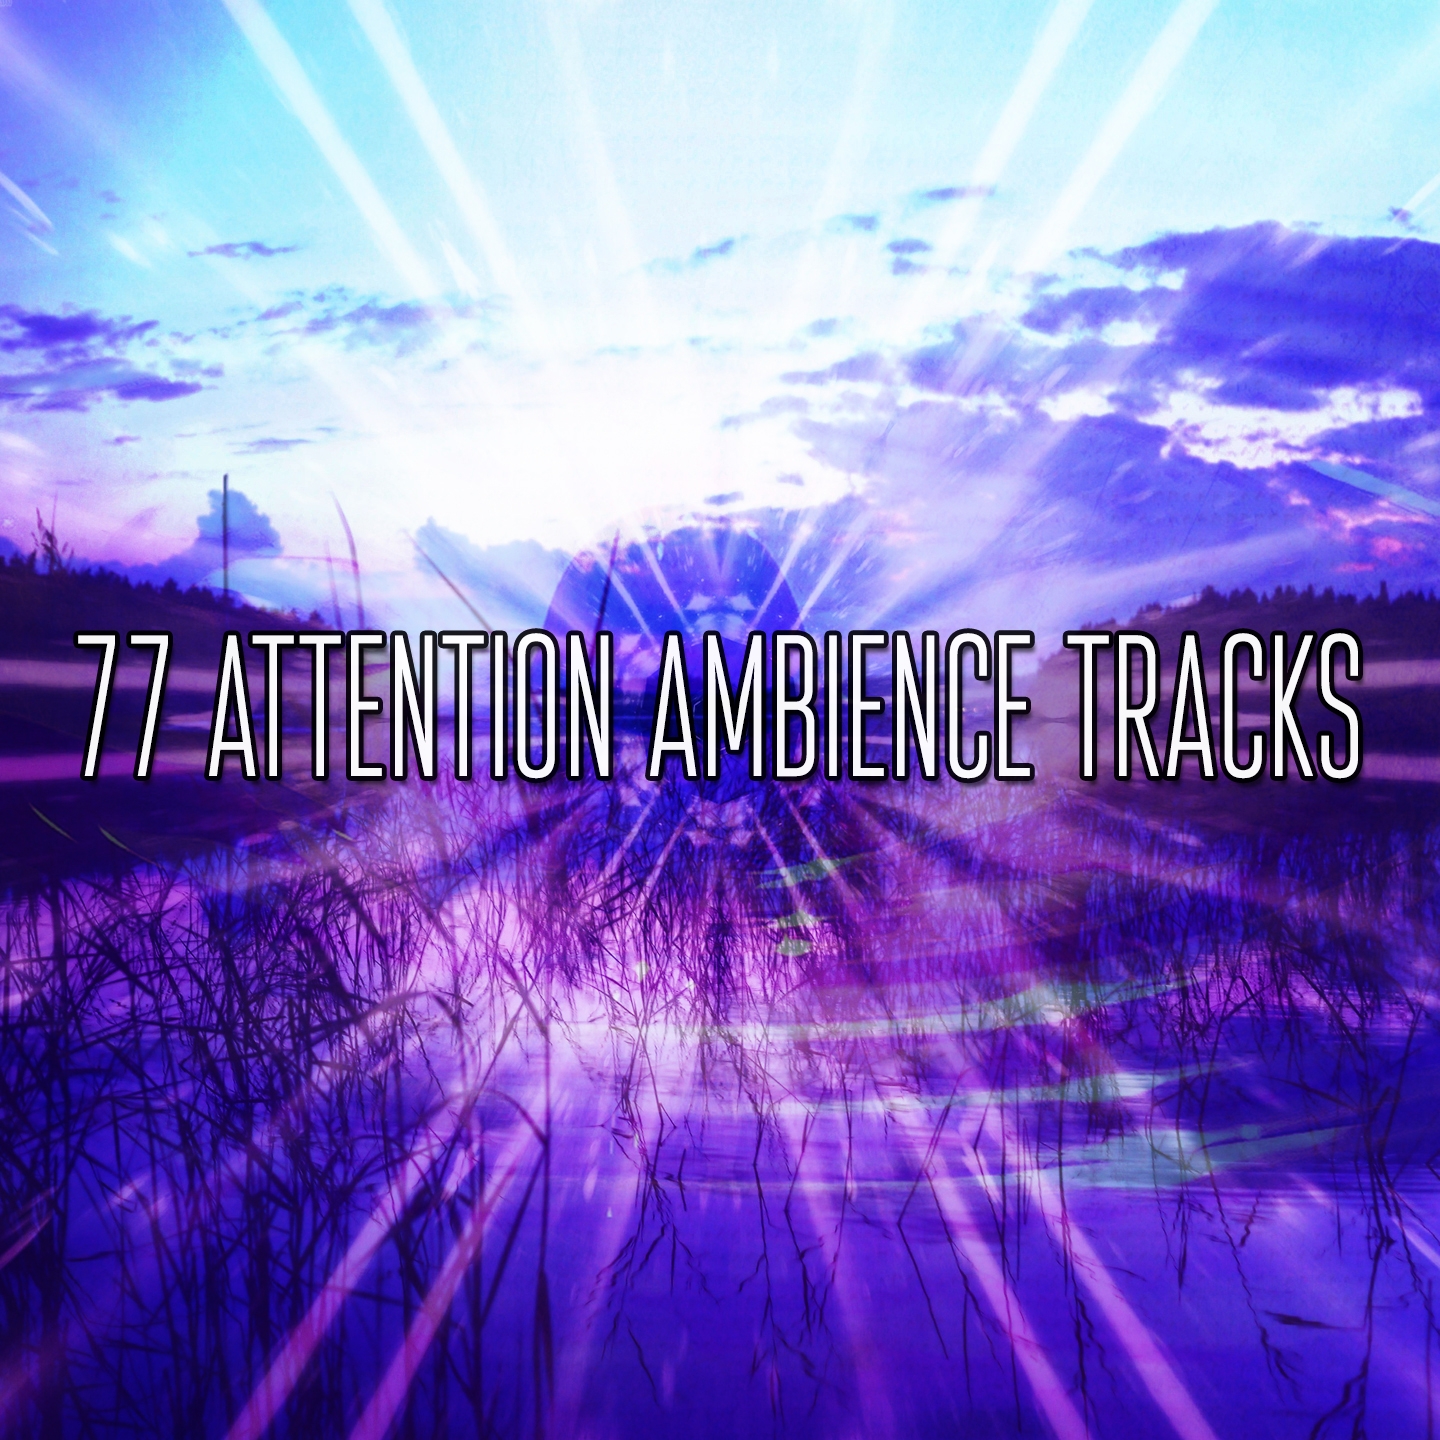 77 Attention Ambience Tracks